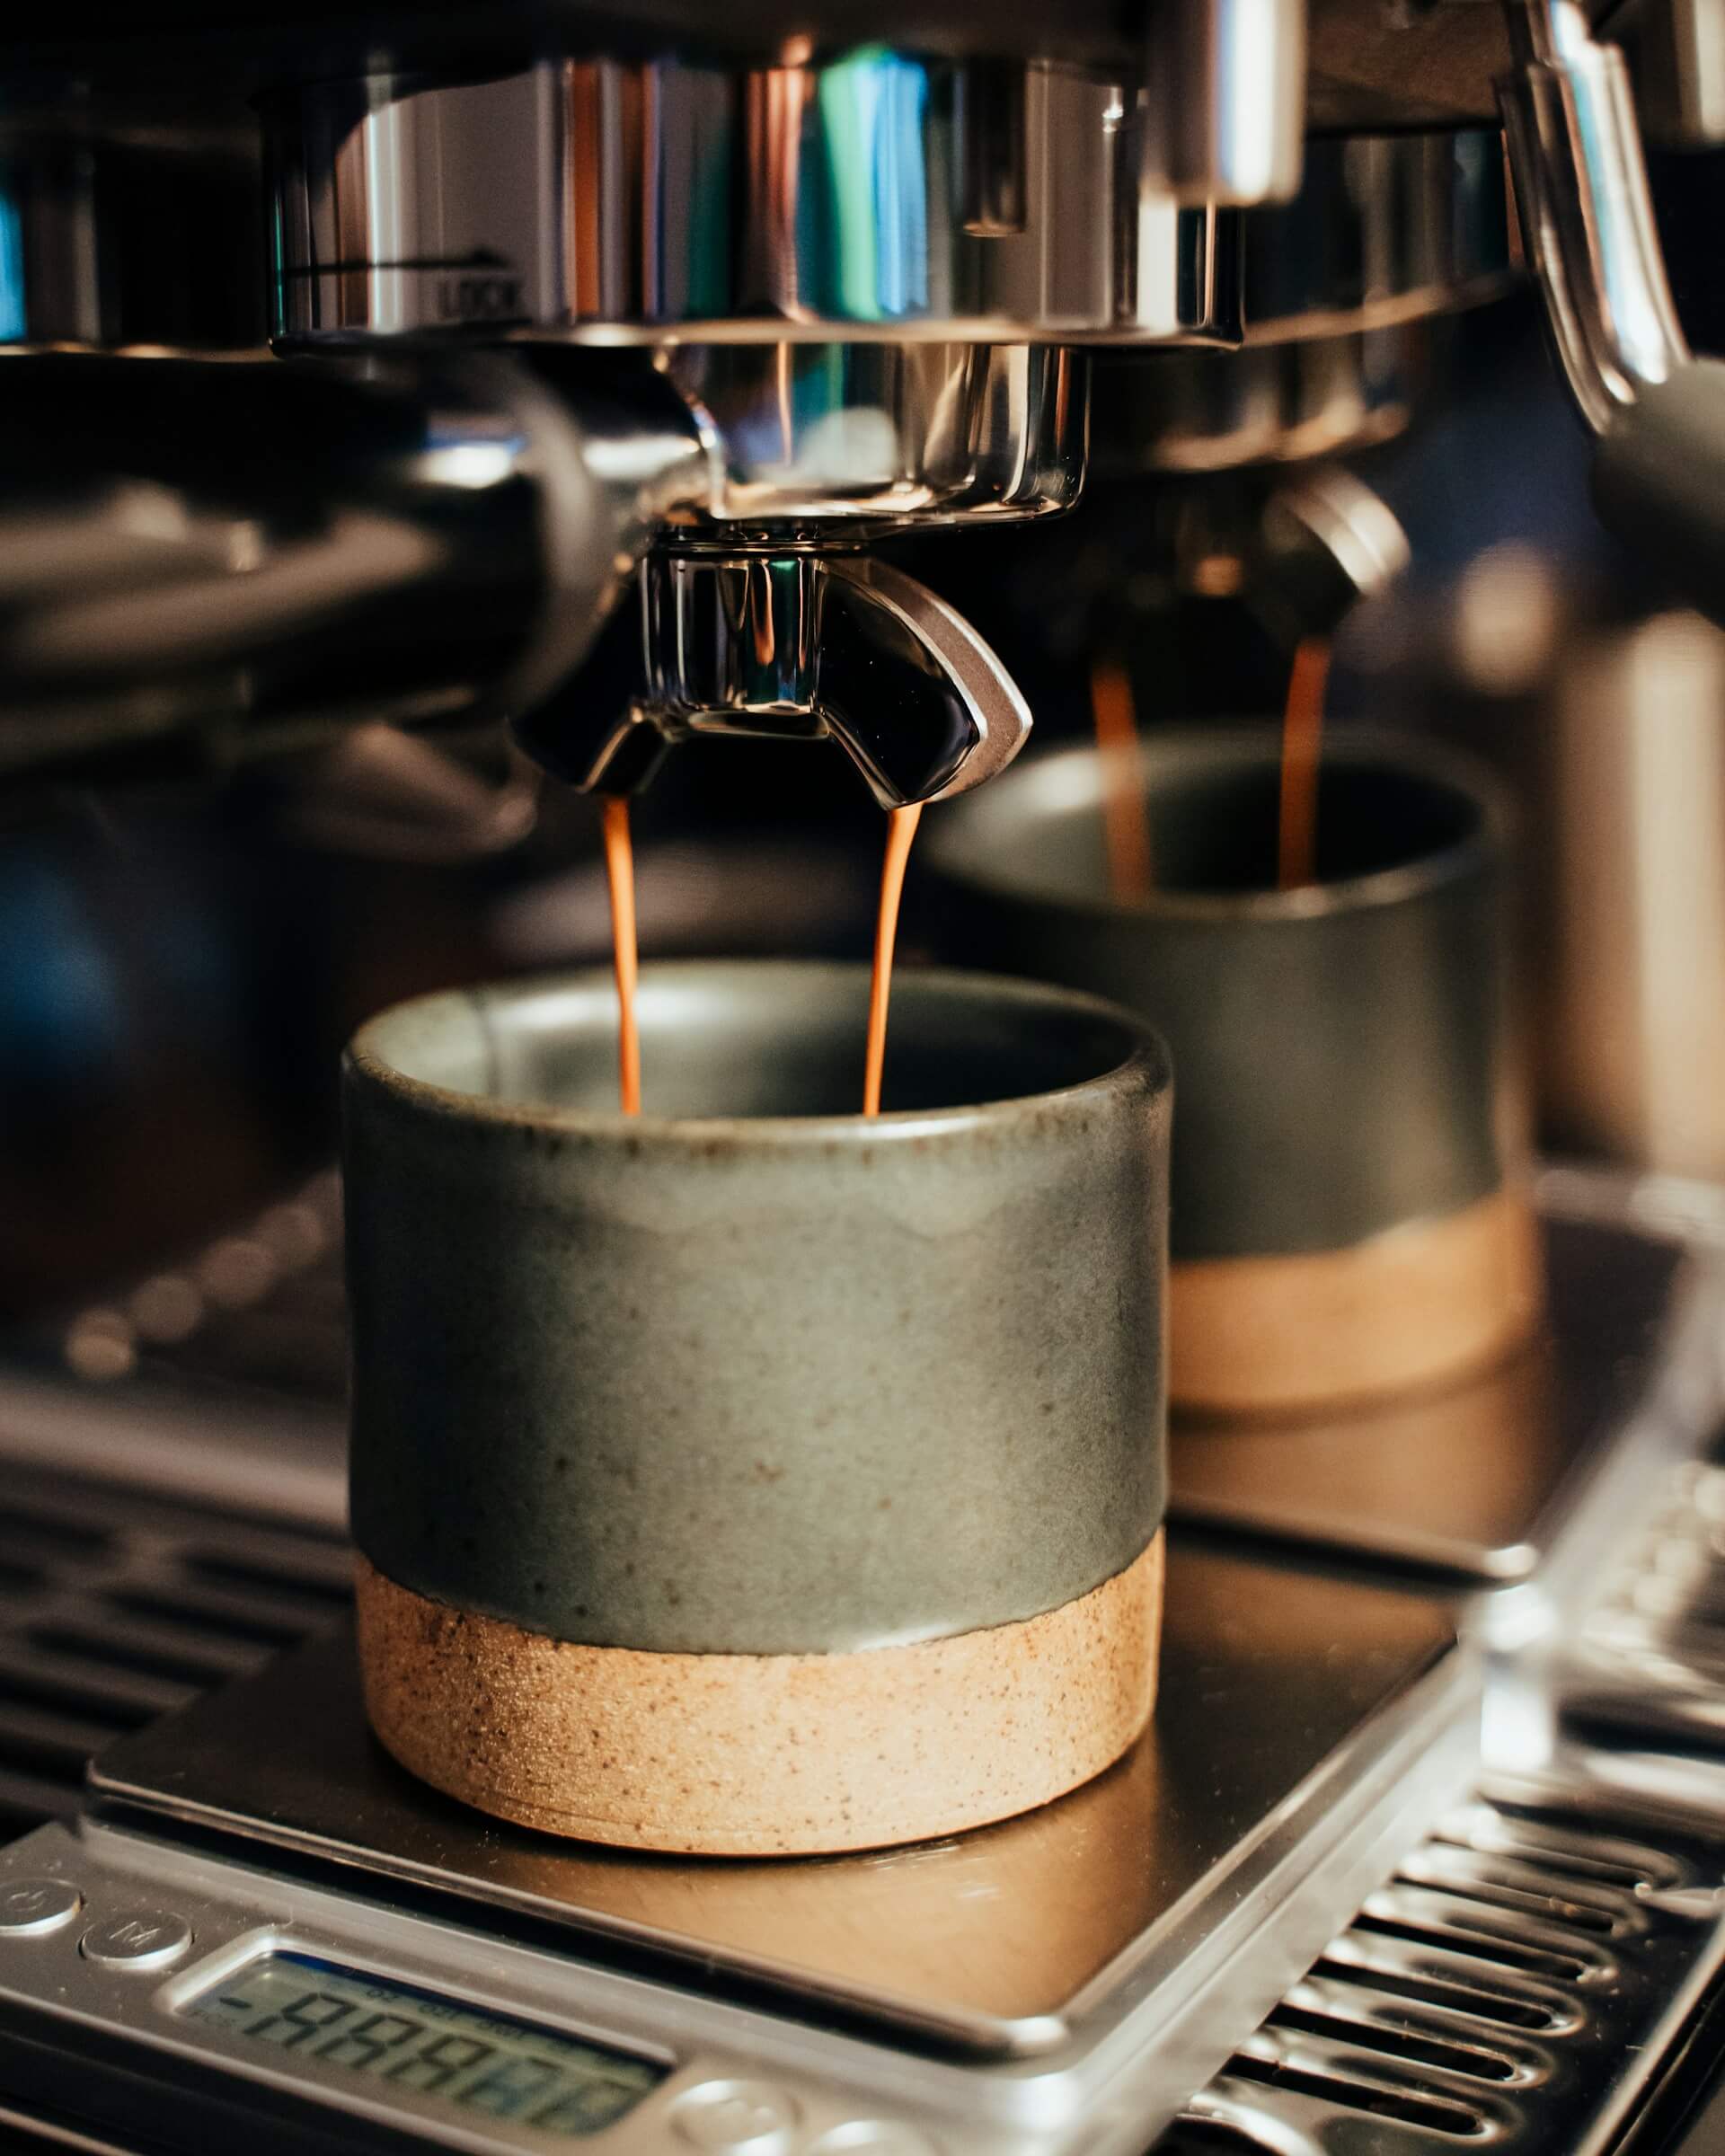 Perfecting the art of coffee extraction: a precise and rewarding process. Photo by <a href="https://unsplash.com/@lukeporter?utm_content=creditCopyText&amp;utm_medium=referral&amp;utm_source=unsplash">Luke Porter</a> on <a href="https://unsplash.com/photos/white-ceramic-cup-on-black-and-silver-coffee-maker-zZfuH4lINlk?utm_content=creditCopyText&amp;utm_medium=referral&amp;utm_source=unsplash">Unsplash</a>